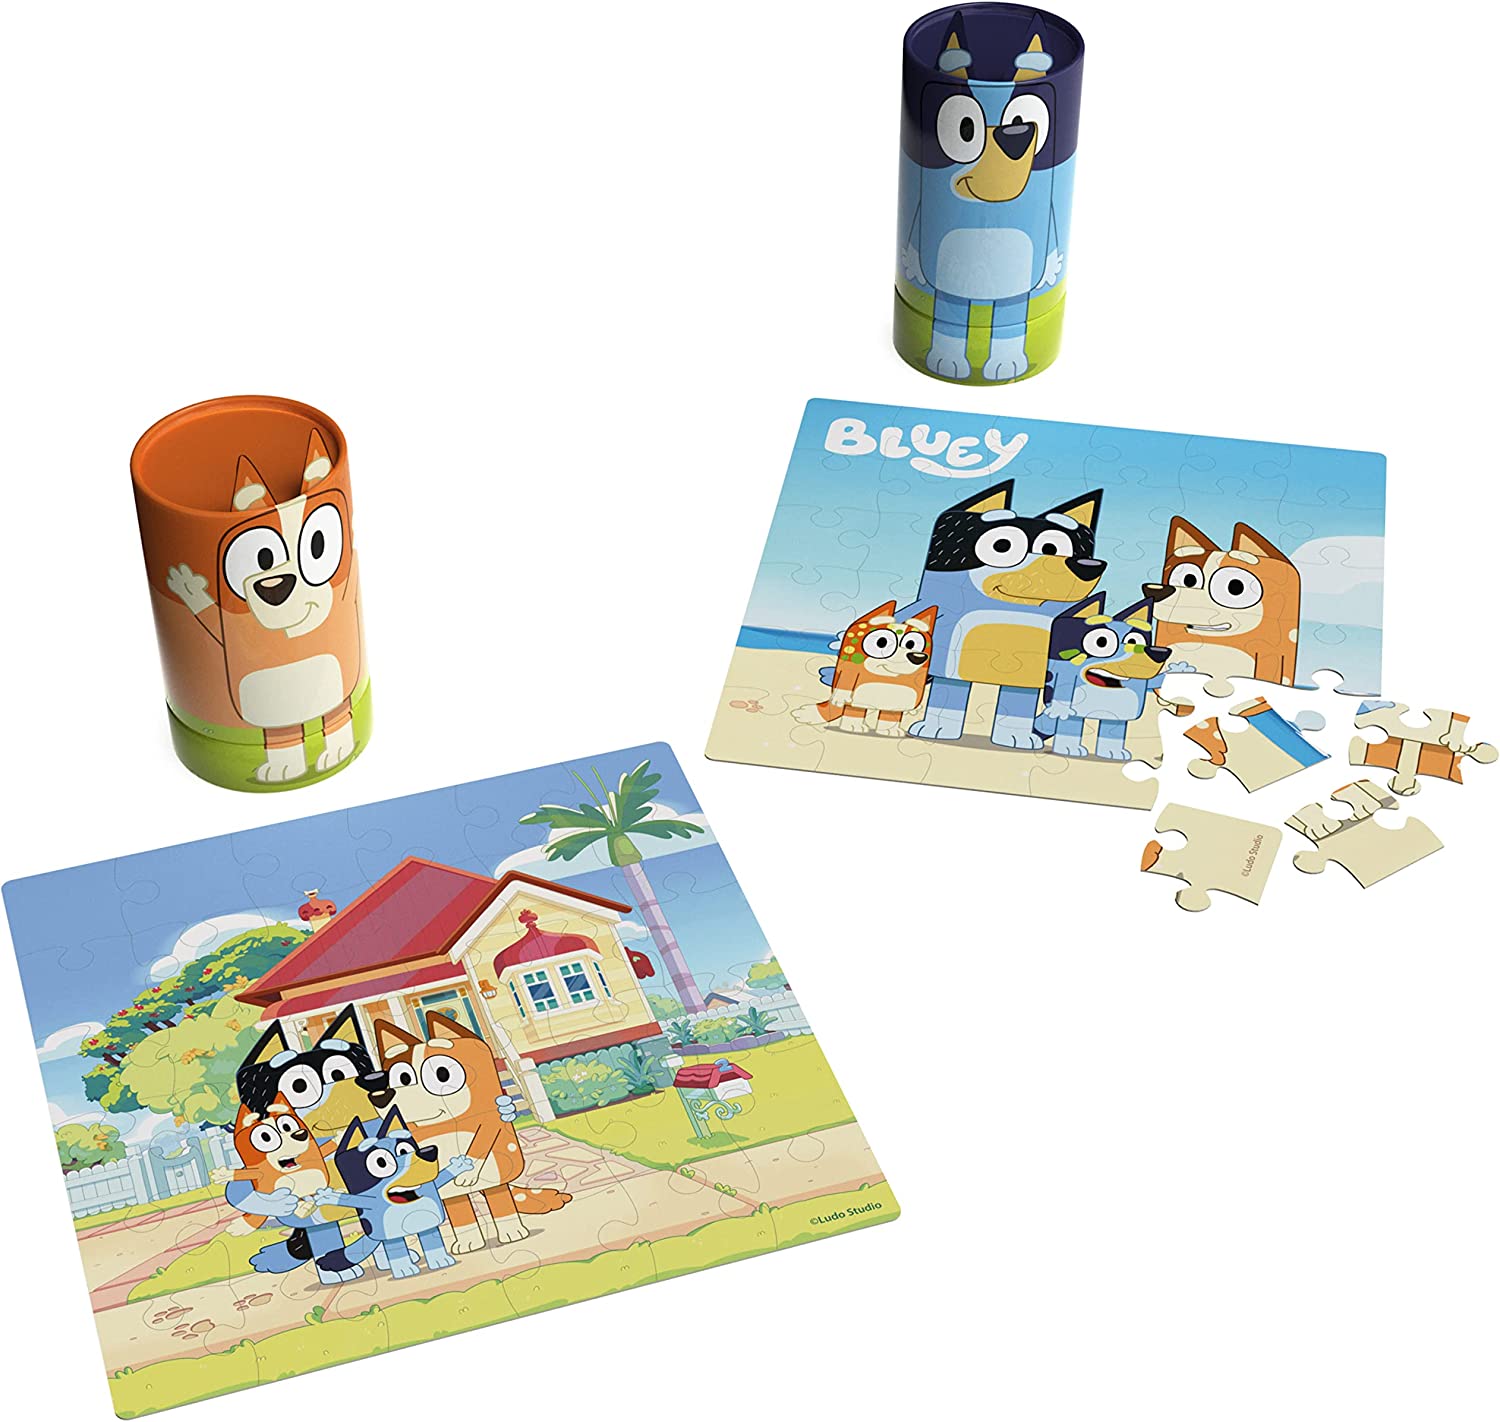 Bluey Character Puzzles 2x36pc